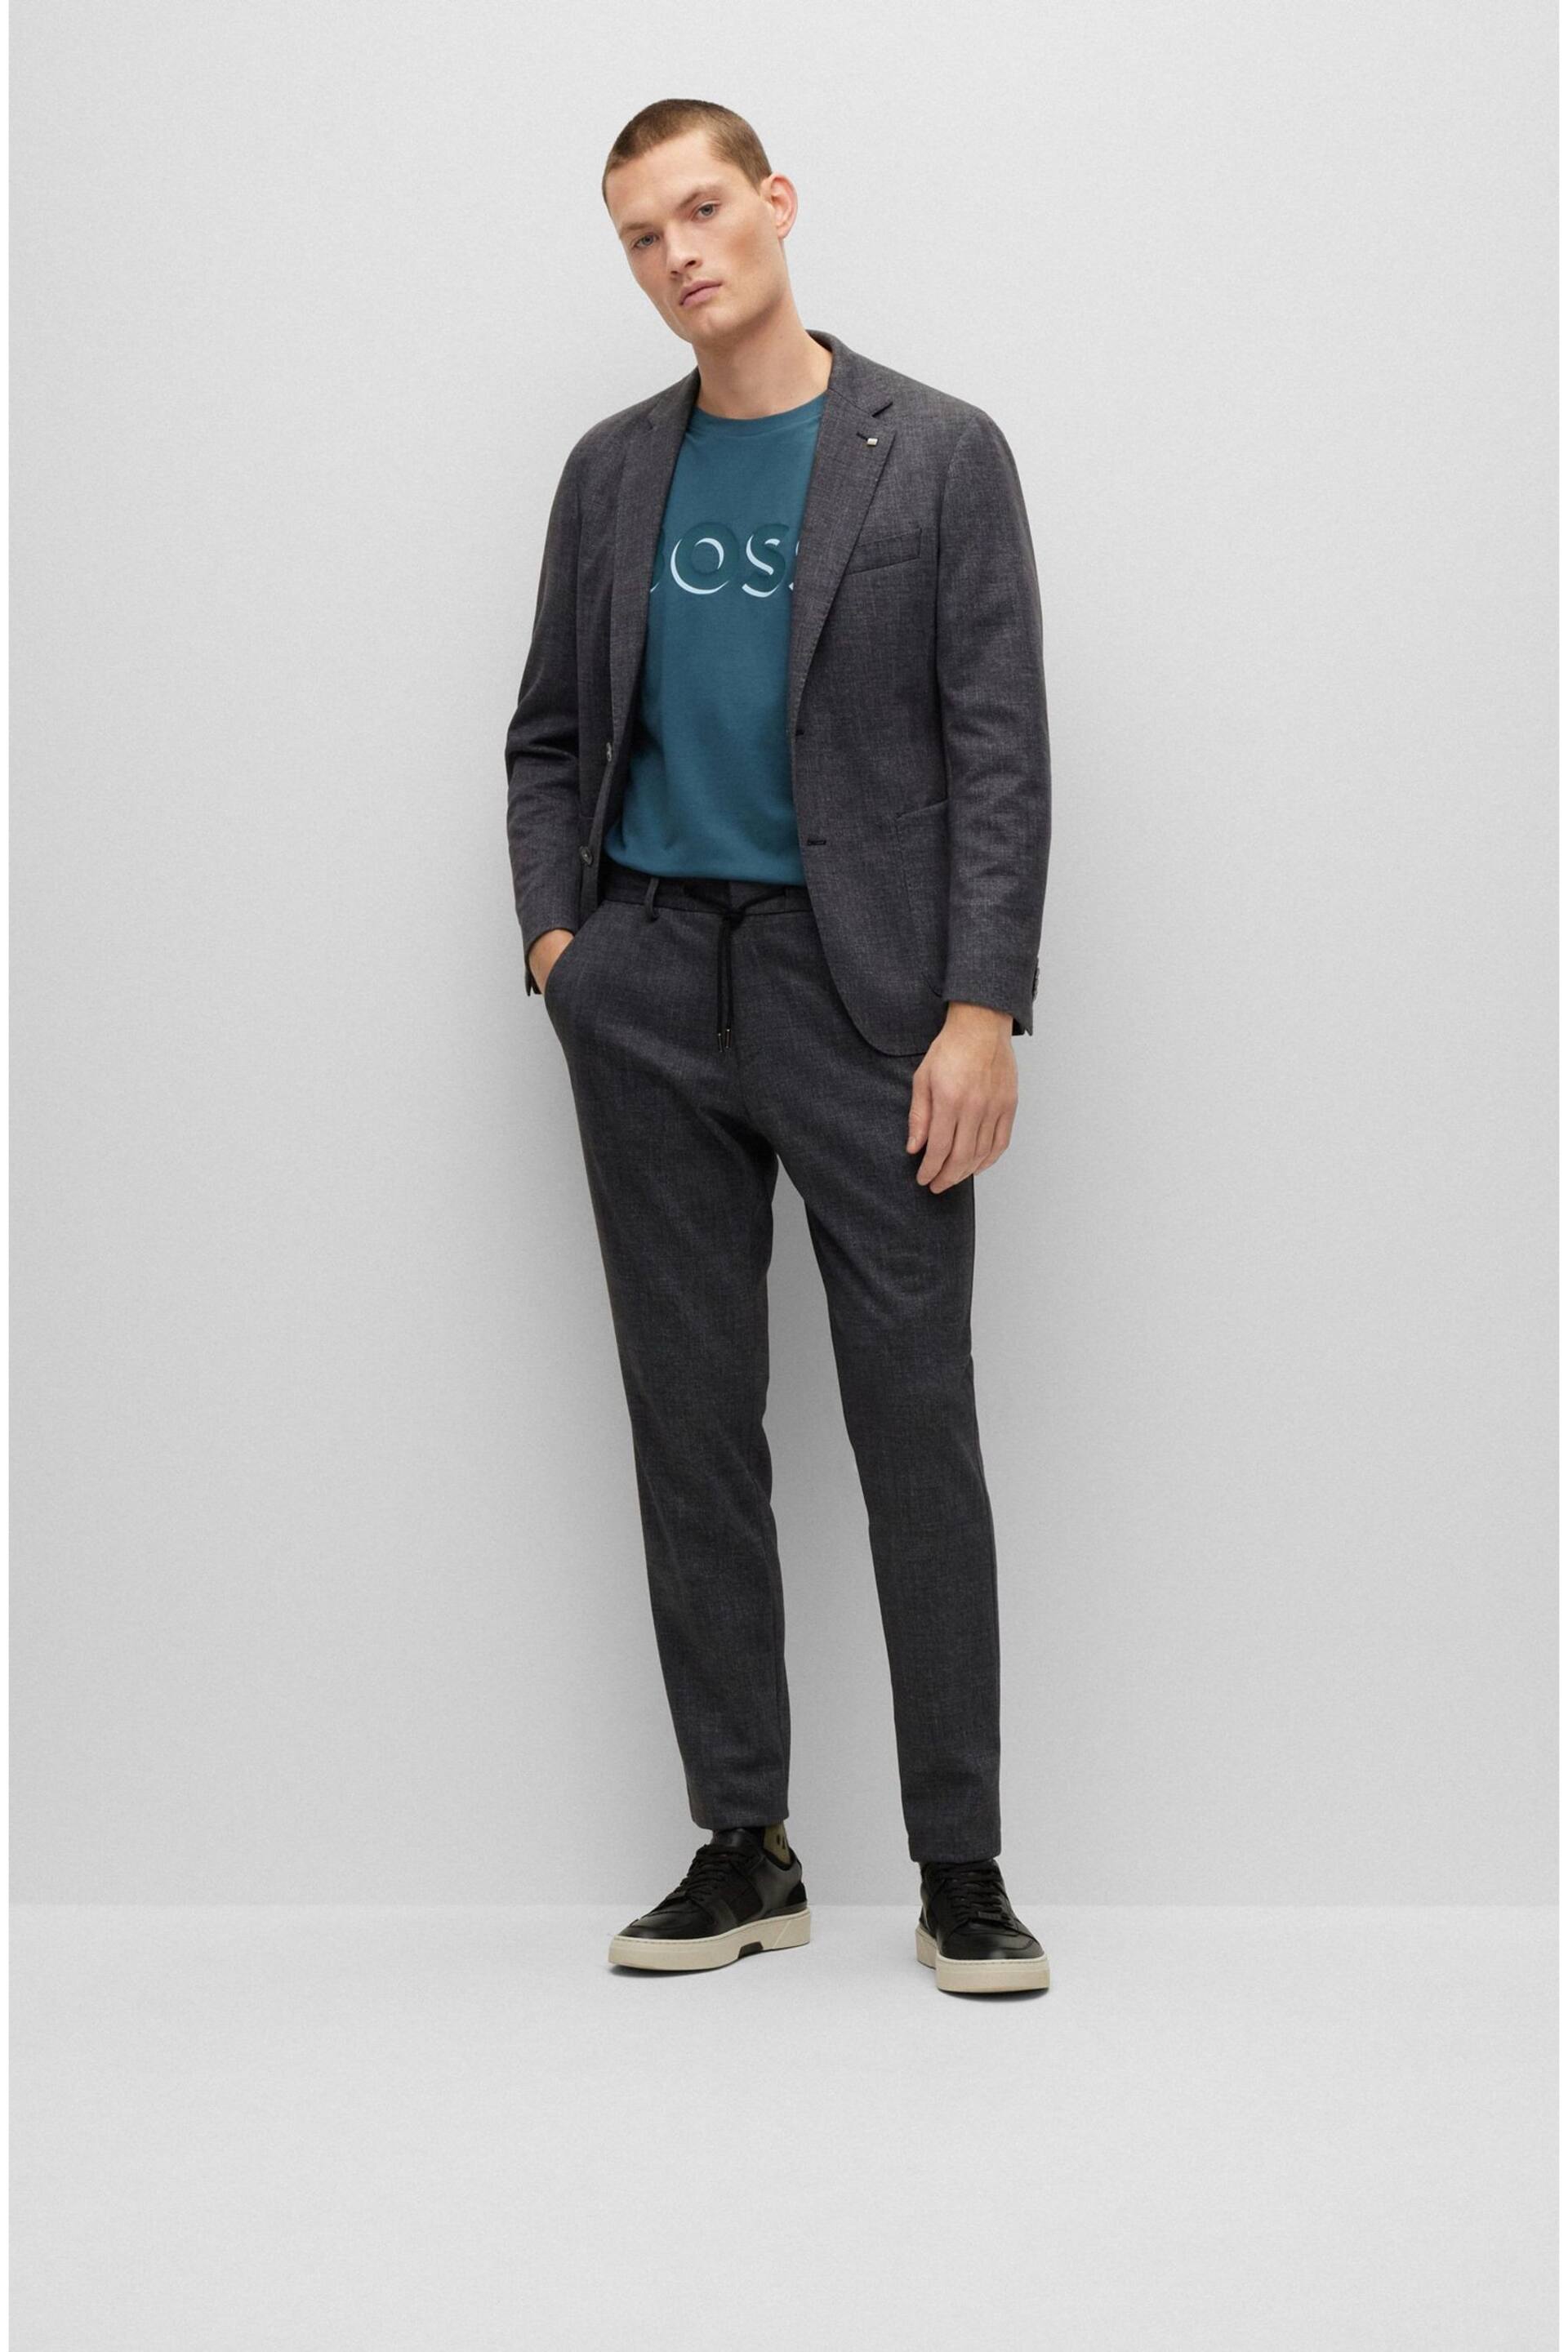 BOSS Dark Blue Tapered Fit Contempory Check Trousers - Image 9 of 10